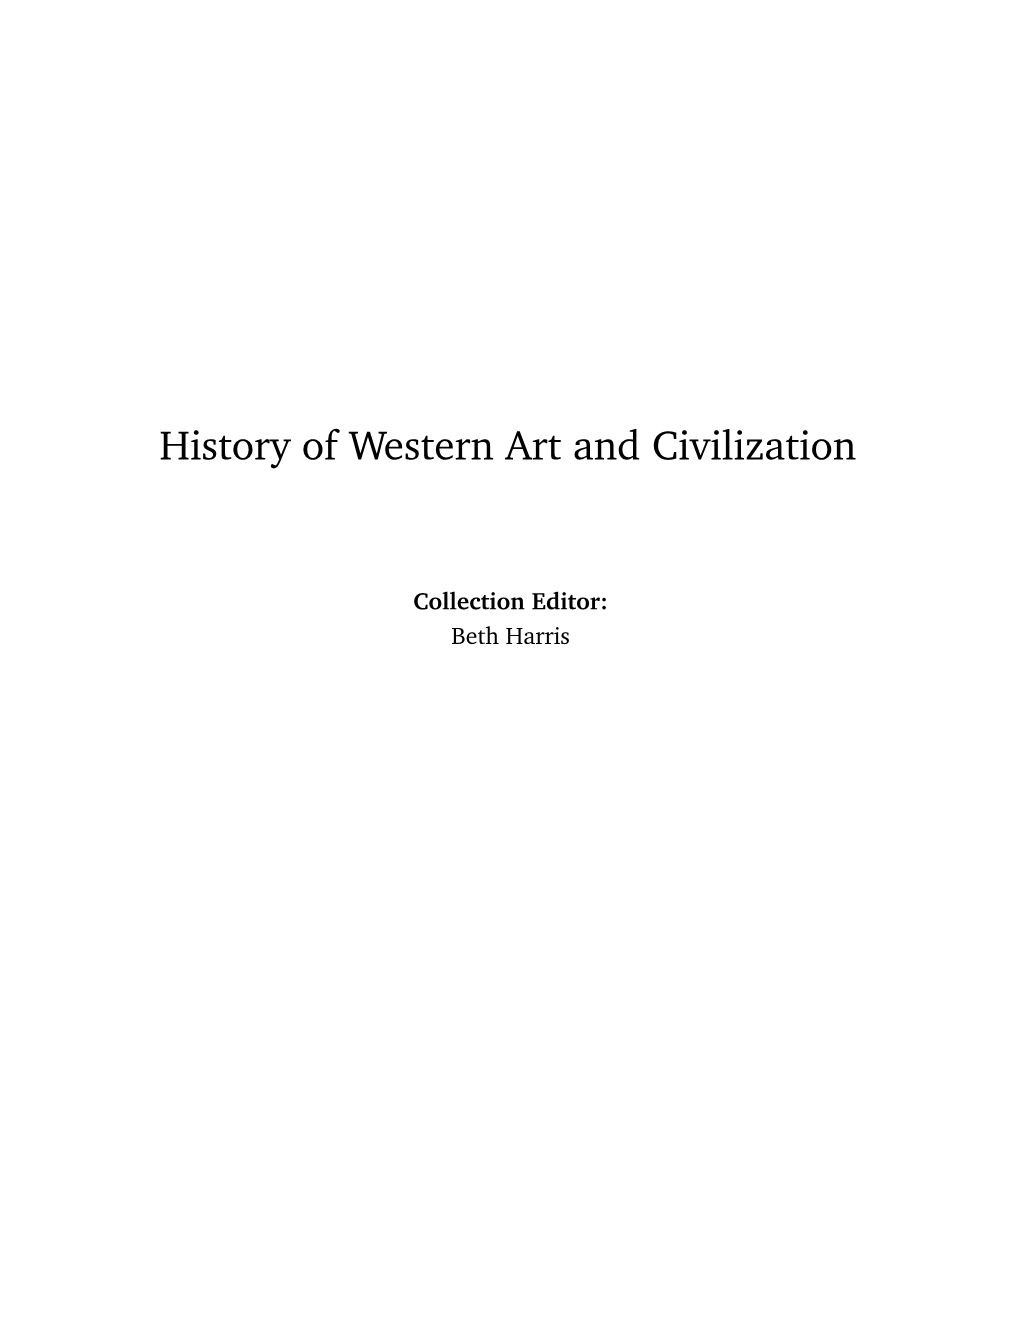 History of Western Art and Civilization